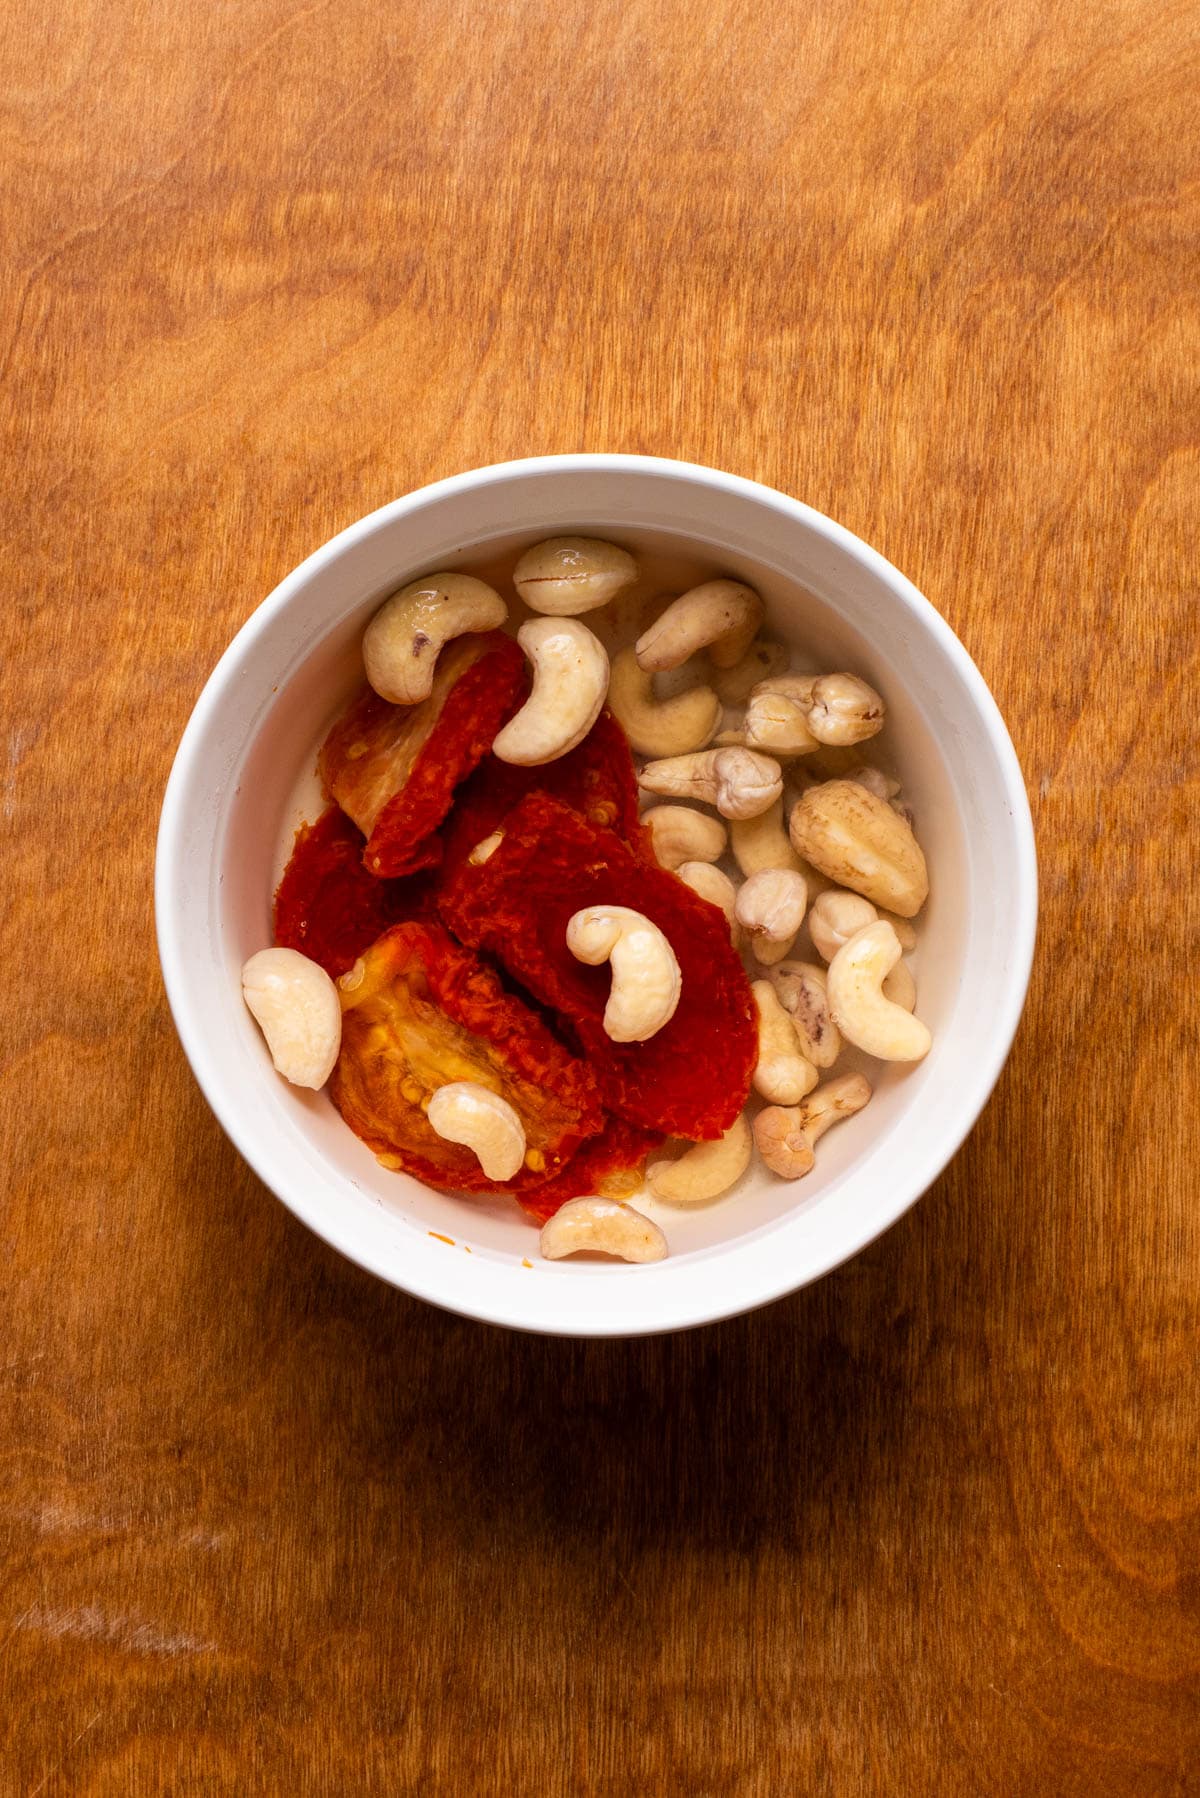 Soaking sun-dried tomatoes and cashews in a bowl of water.